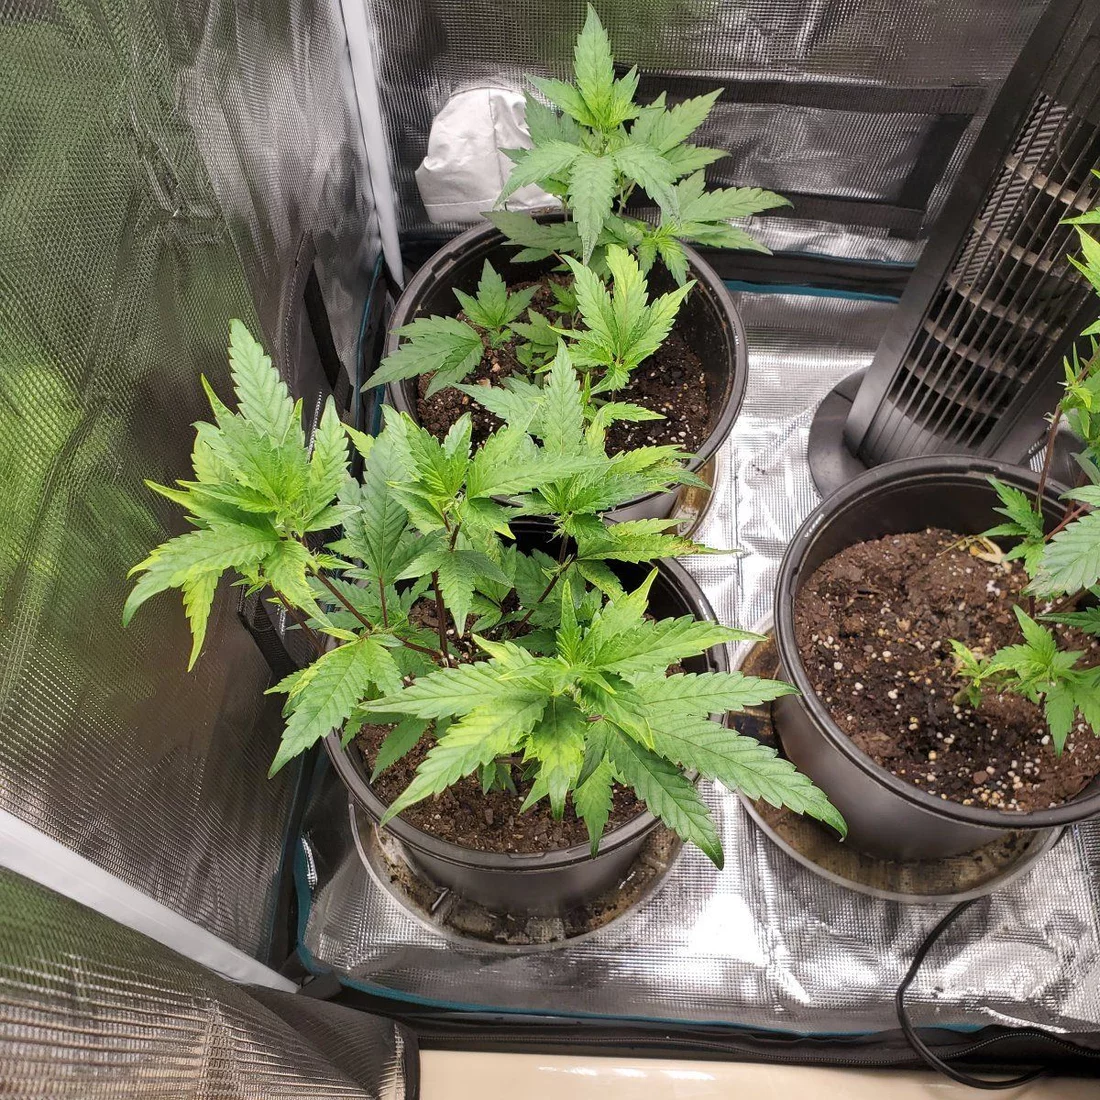 1st time grower deficiency or 6